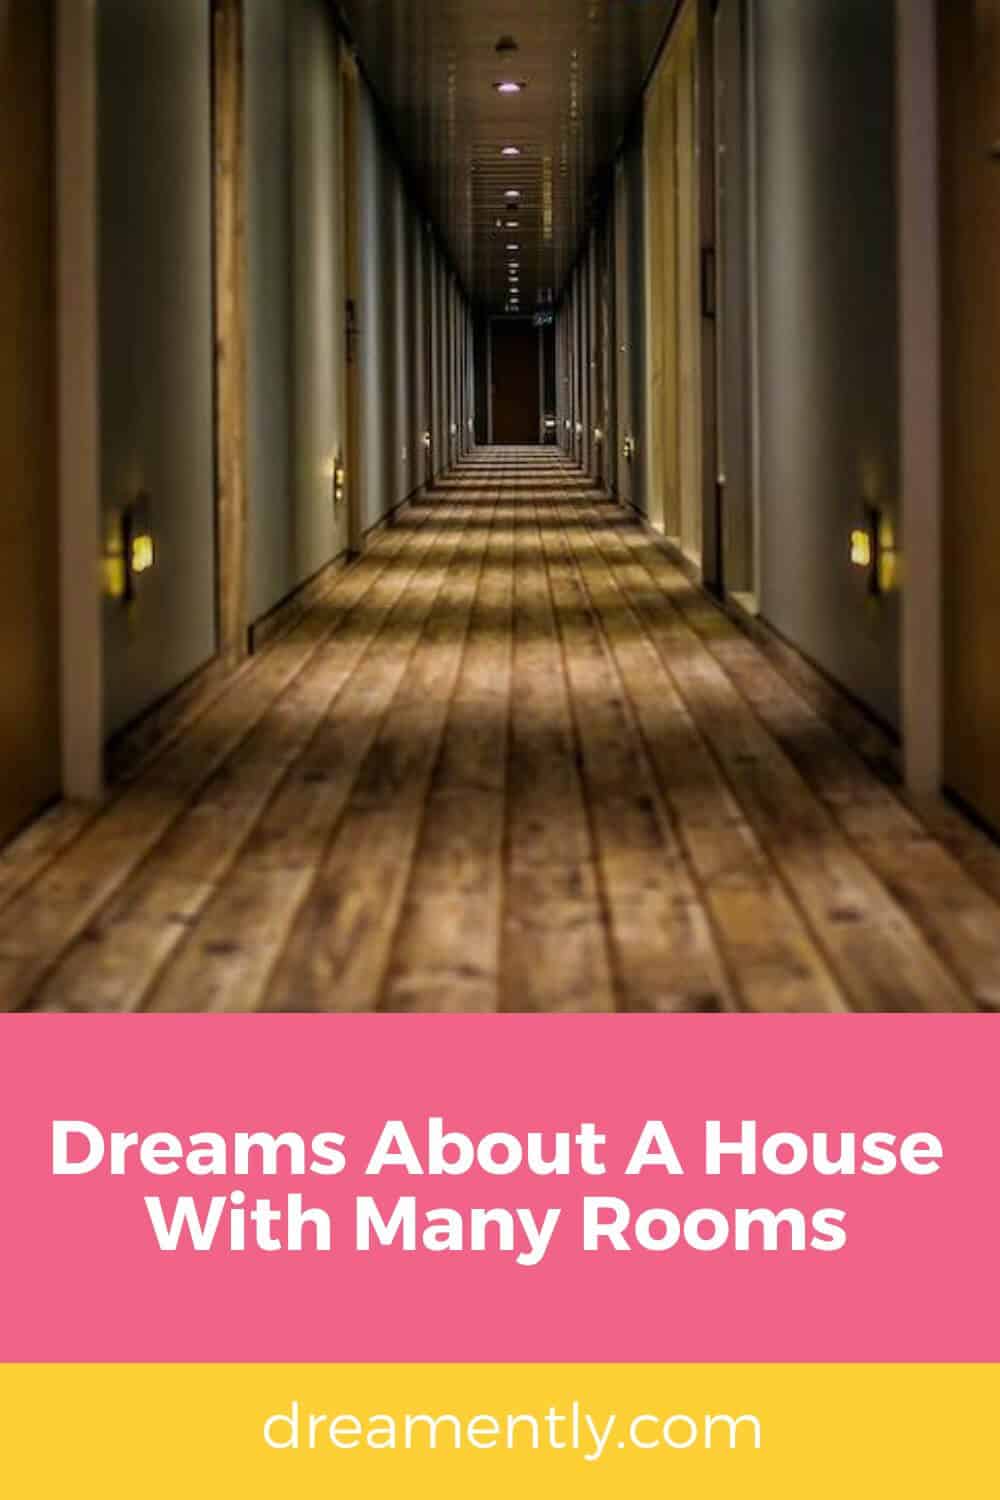 Dreams About A House With Many Rooms